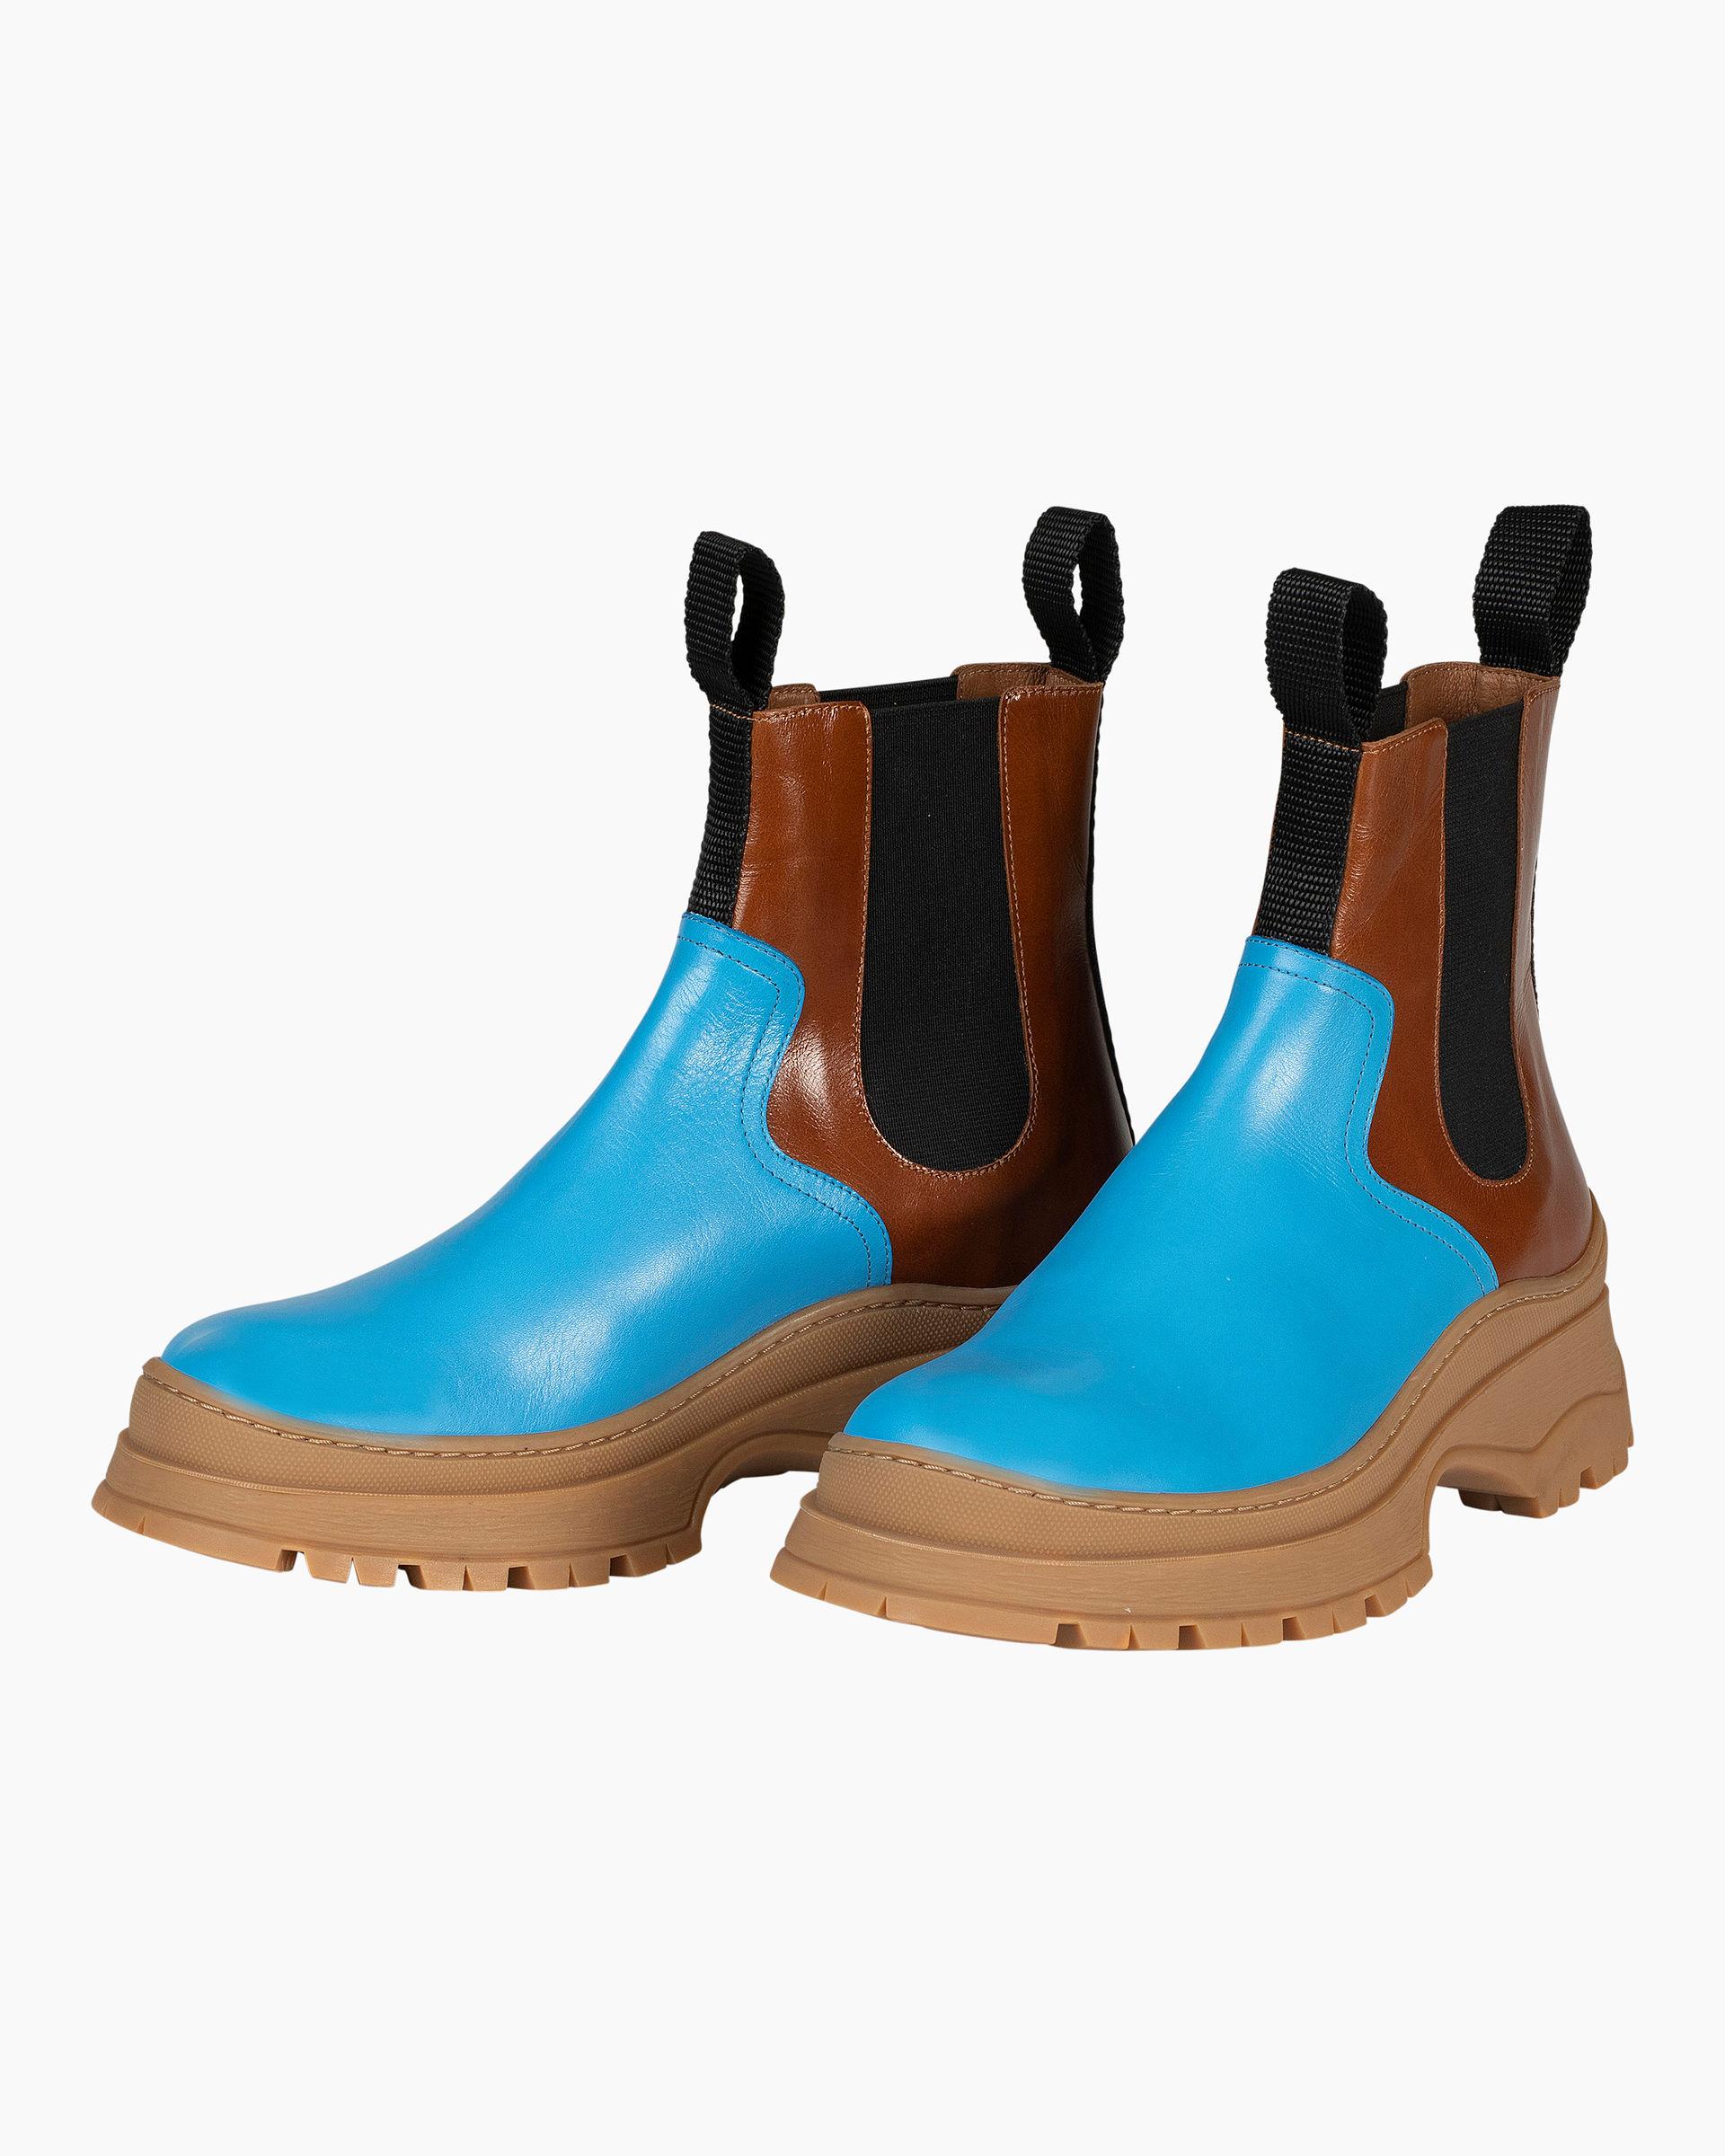 Marimekko Leather Solveig Ankle Boots in Brown, Turquoise (Blue) - Lyst